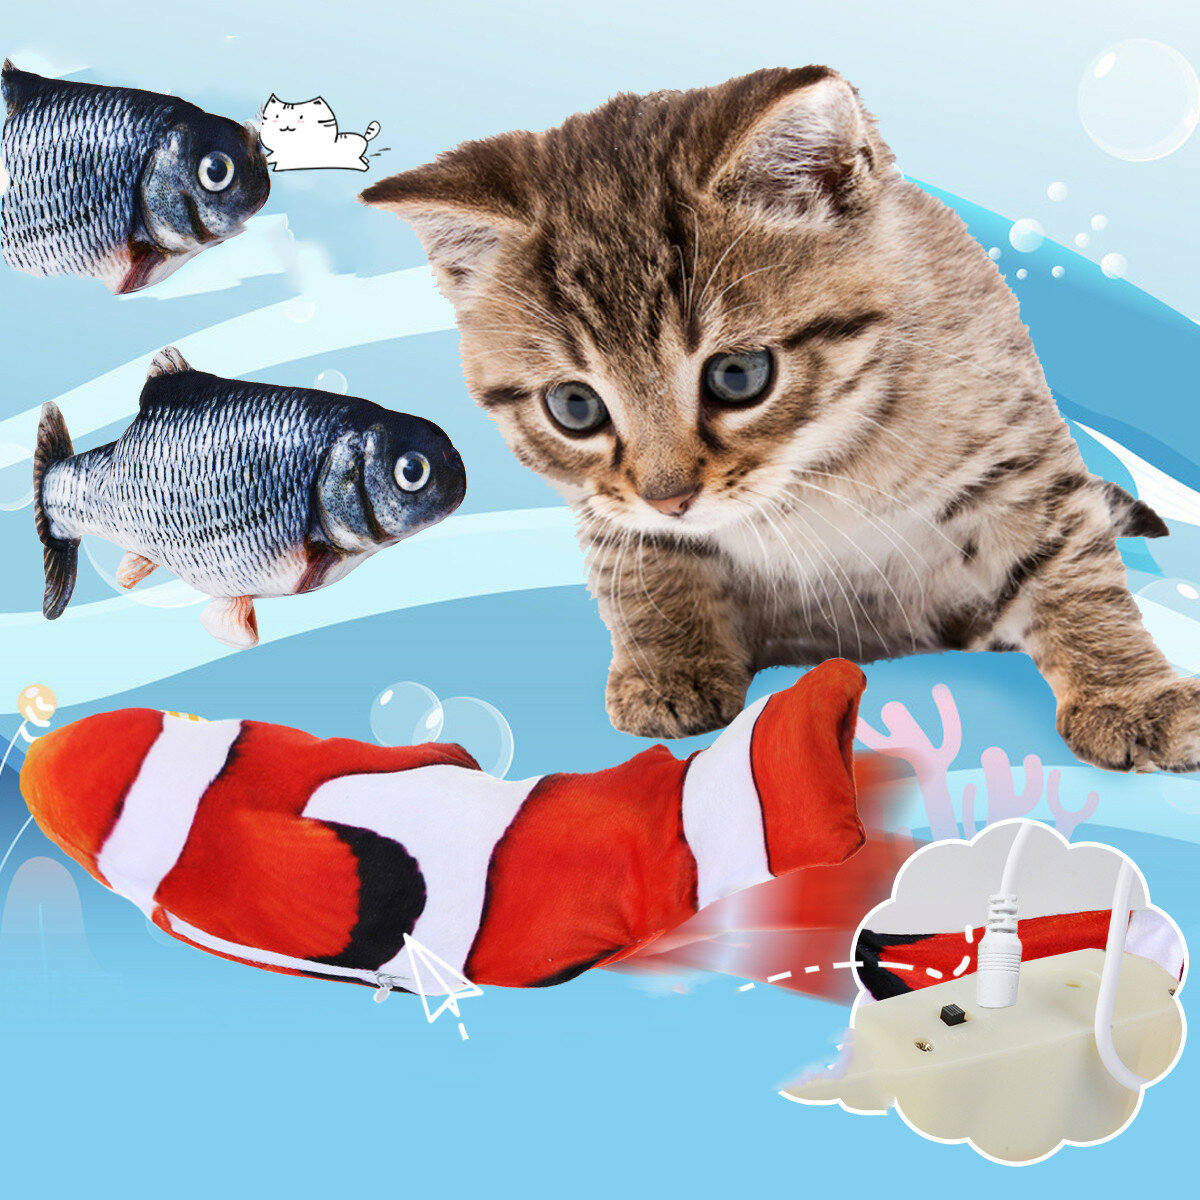 Jeteven Cat Clownfish Carp with Catnip Charging Cable Catnip Puppy Toy Pet Supplies Dog Playing